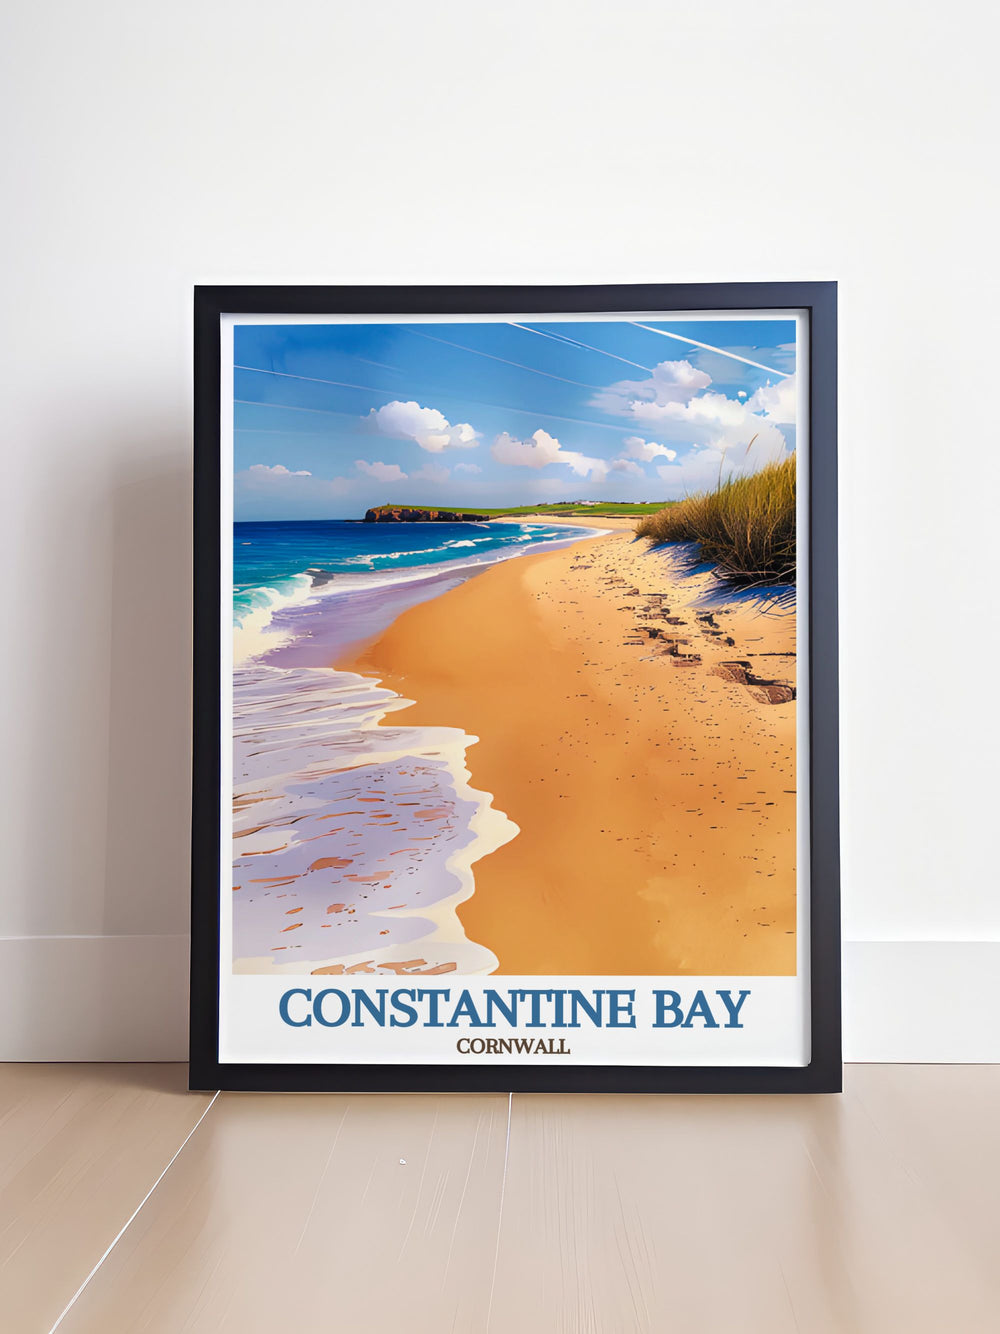 Immerse yourself in the beauty of Constantine Bay Beach, located on the rugged north coast of Cornwall, England. This beach, with its excellent surf conditions and scenic landscape, is ideal for families and surfers looking to enjoy a day by the sea.